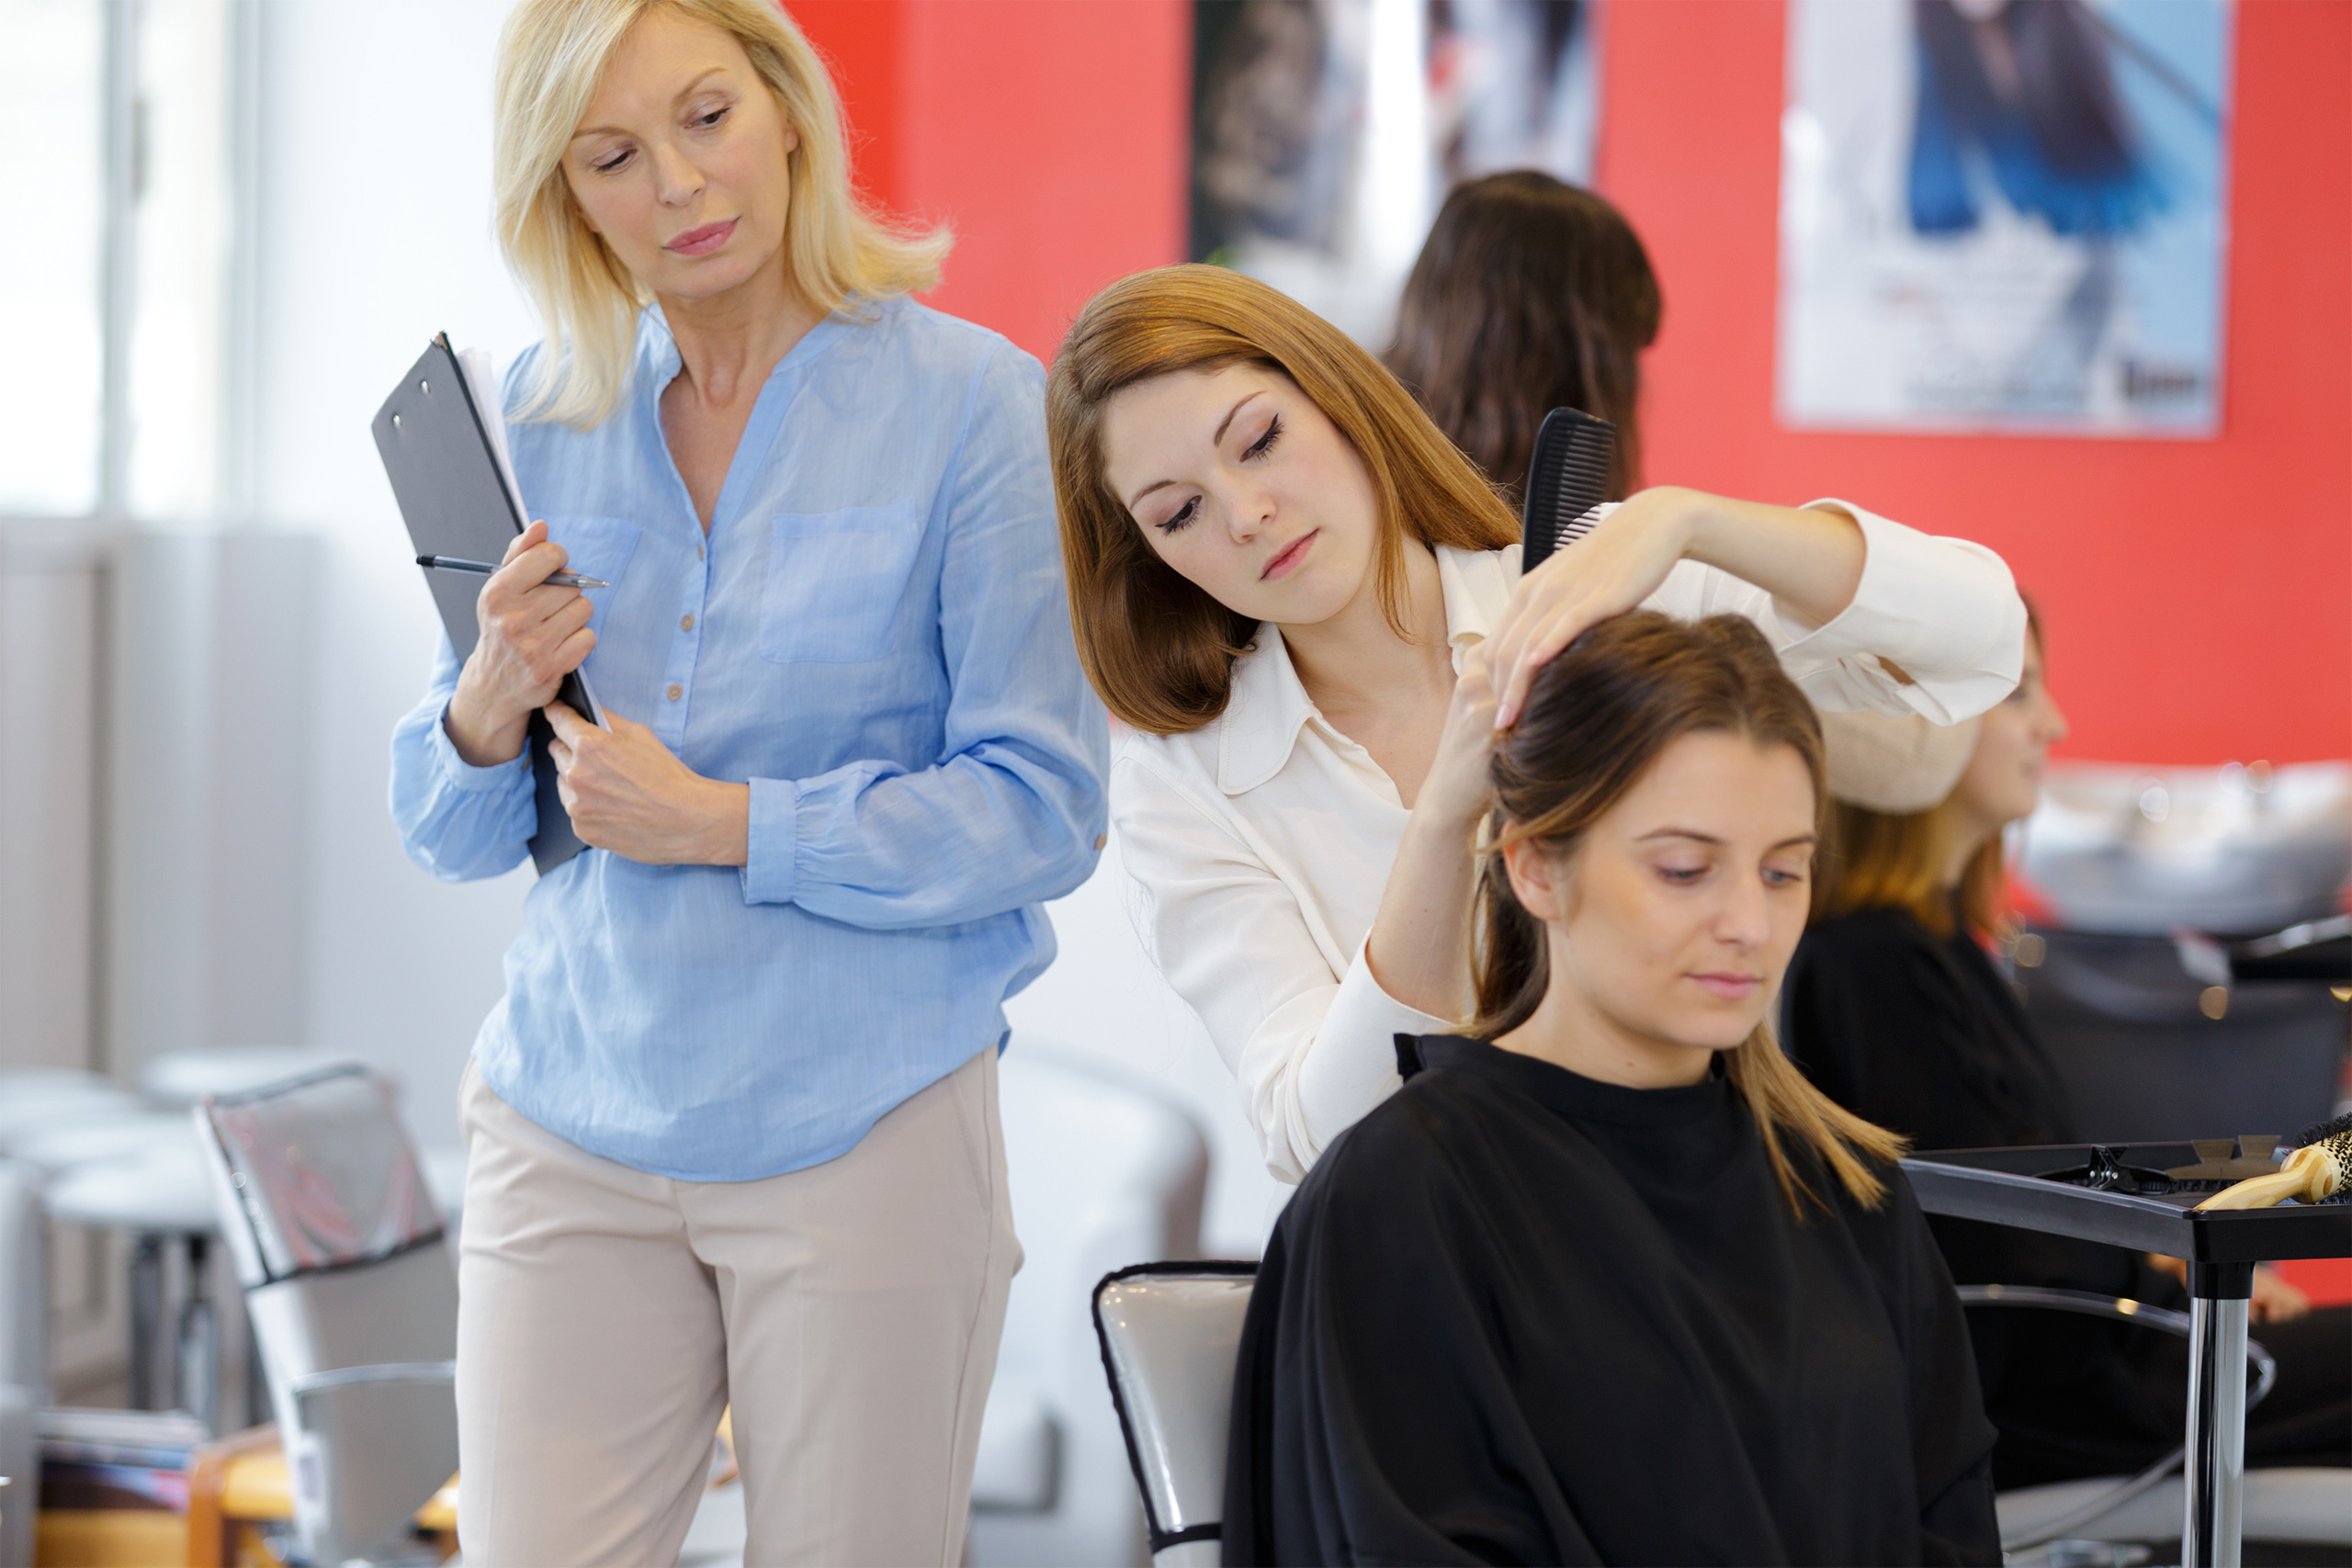 How to Choose the Best School to enroll in a Hair Styling Program